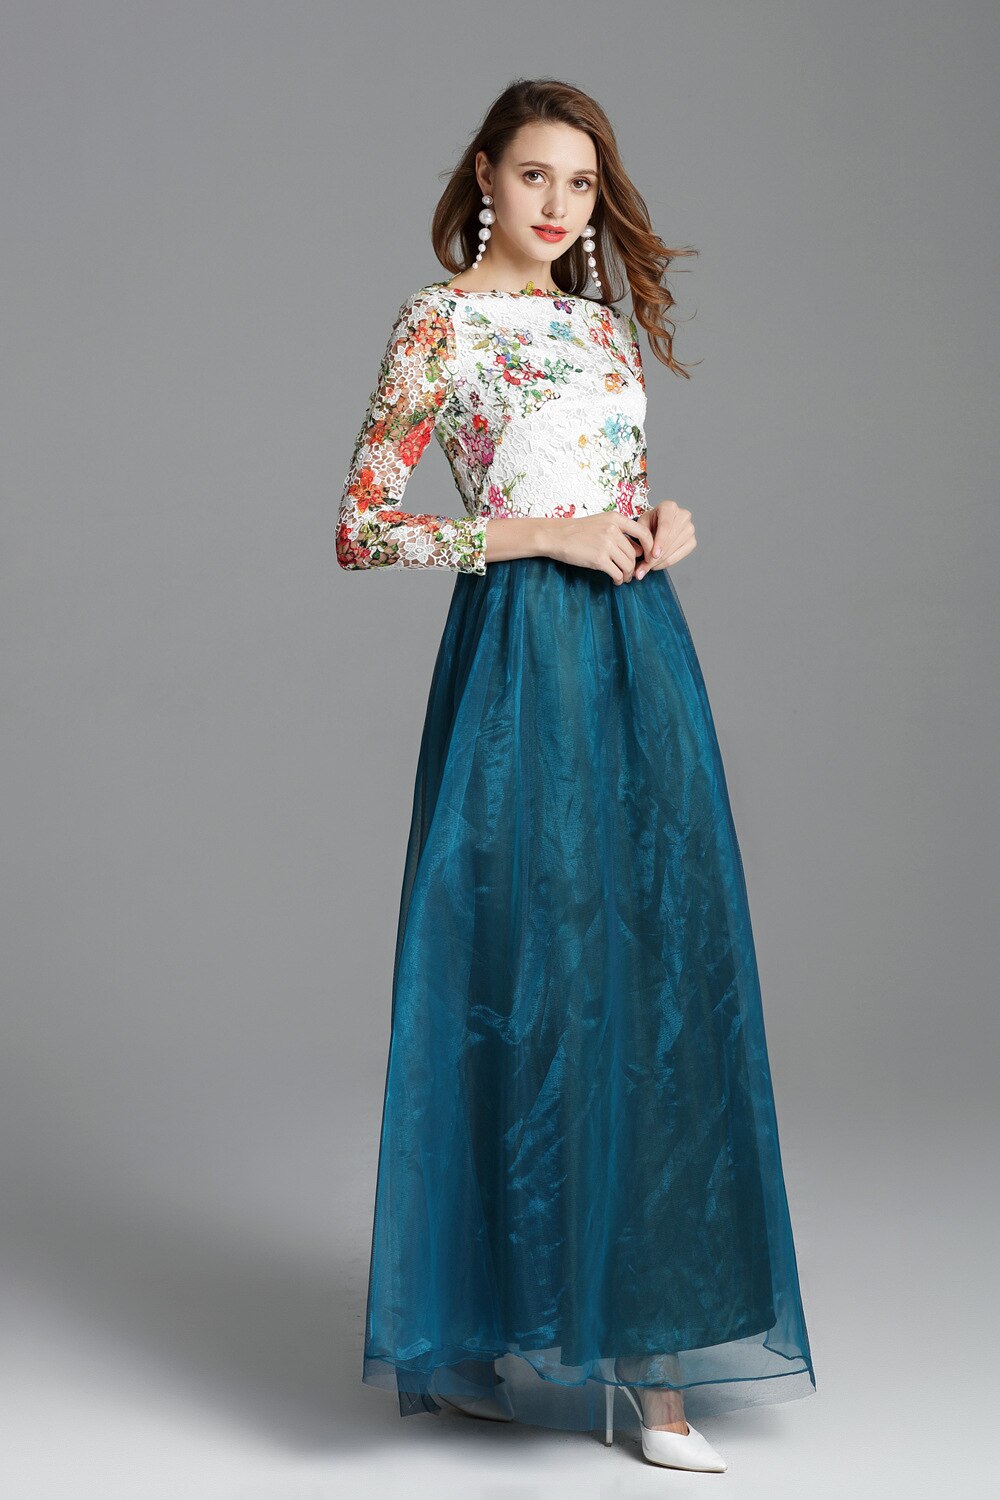 Slash Neckline Embroidery Lace Party Prom Long Sleeves Sequined Fashion Dresses